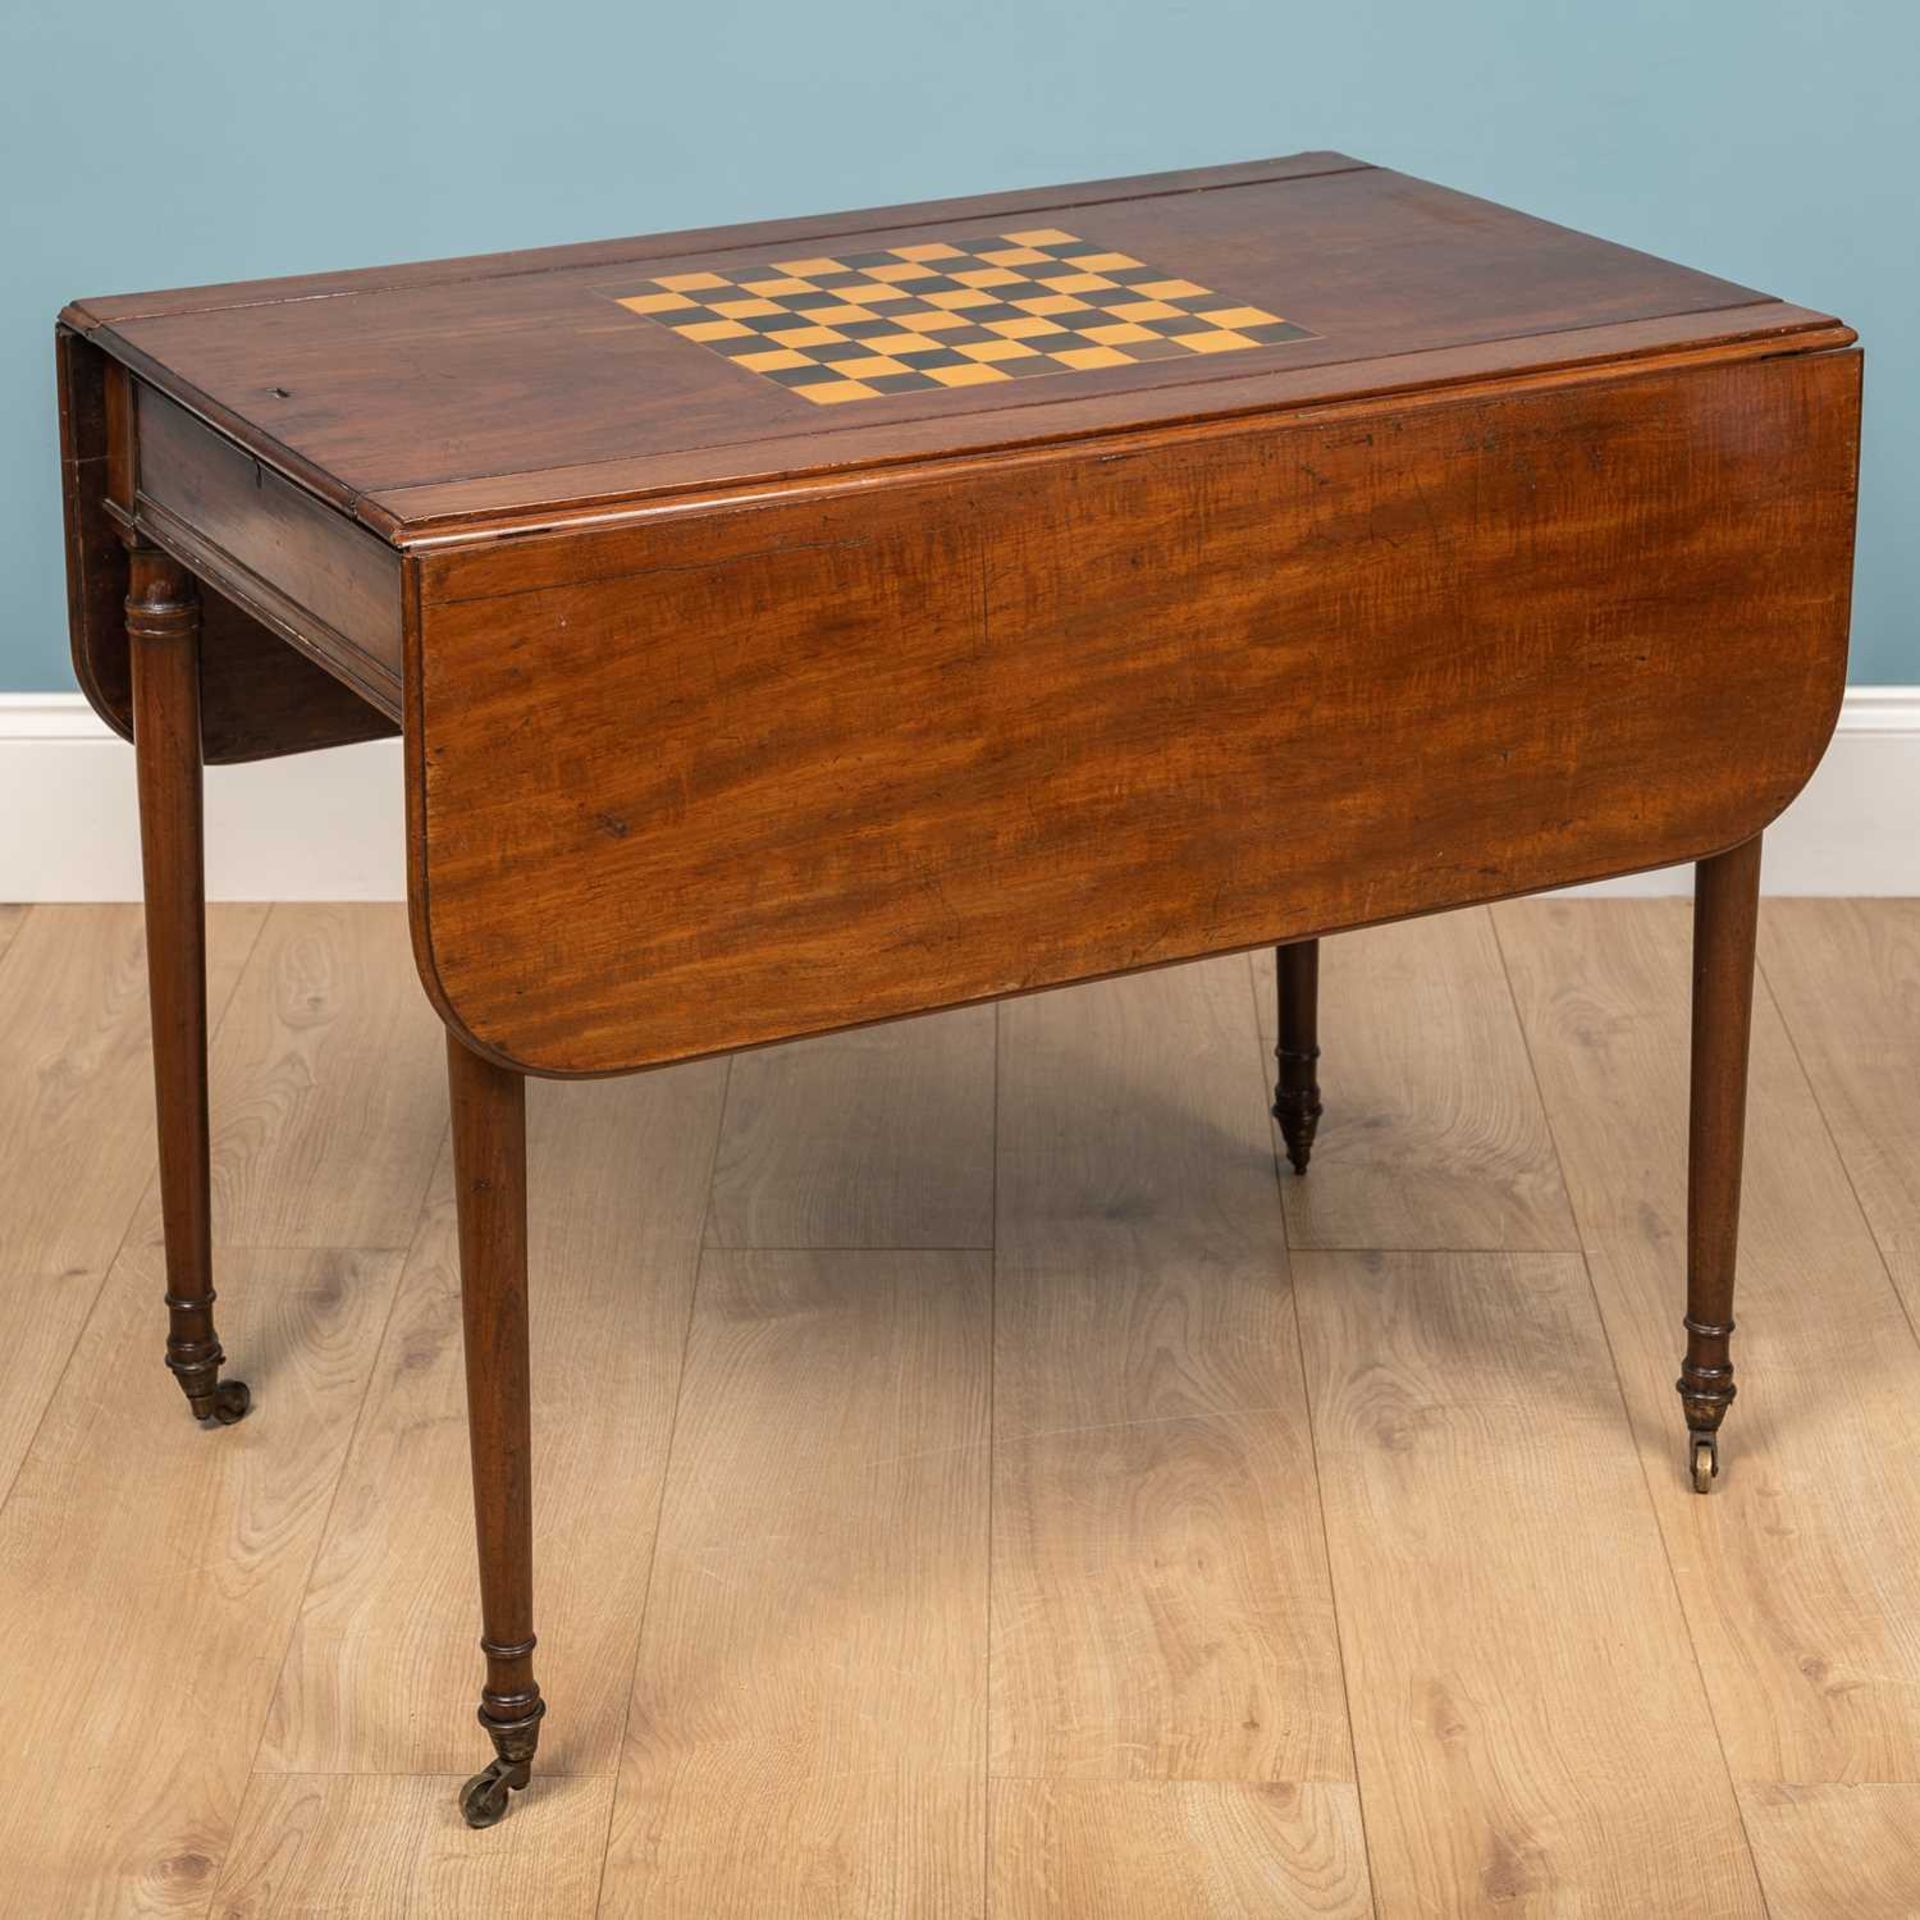 A George III mahogany games table with drop leaves